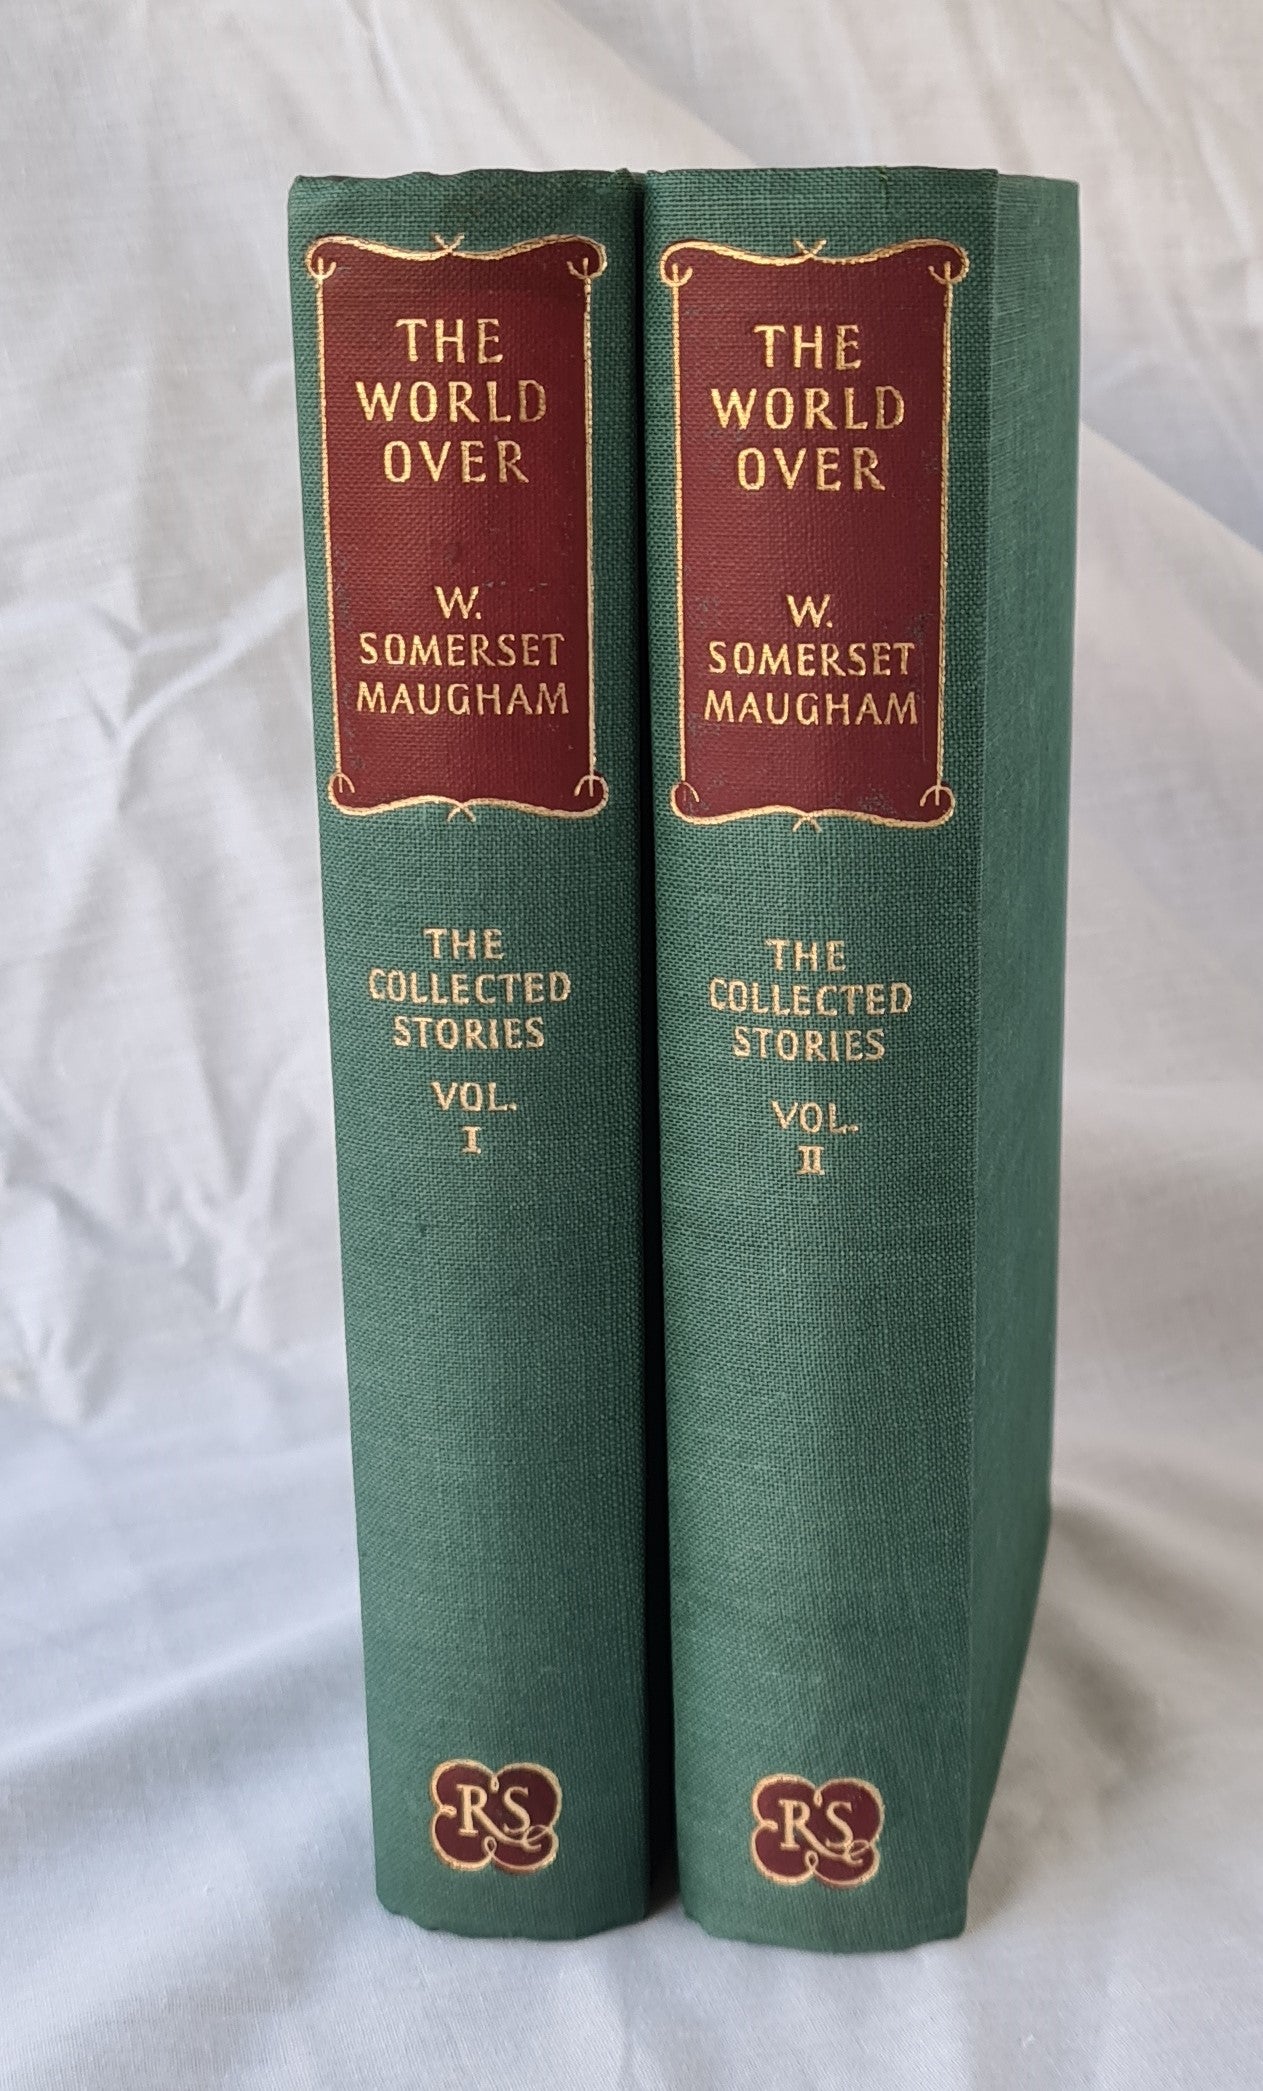 The World Over by W. Somerset Maugham